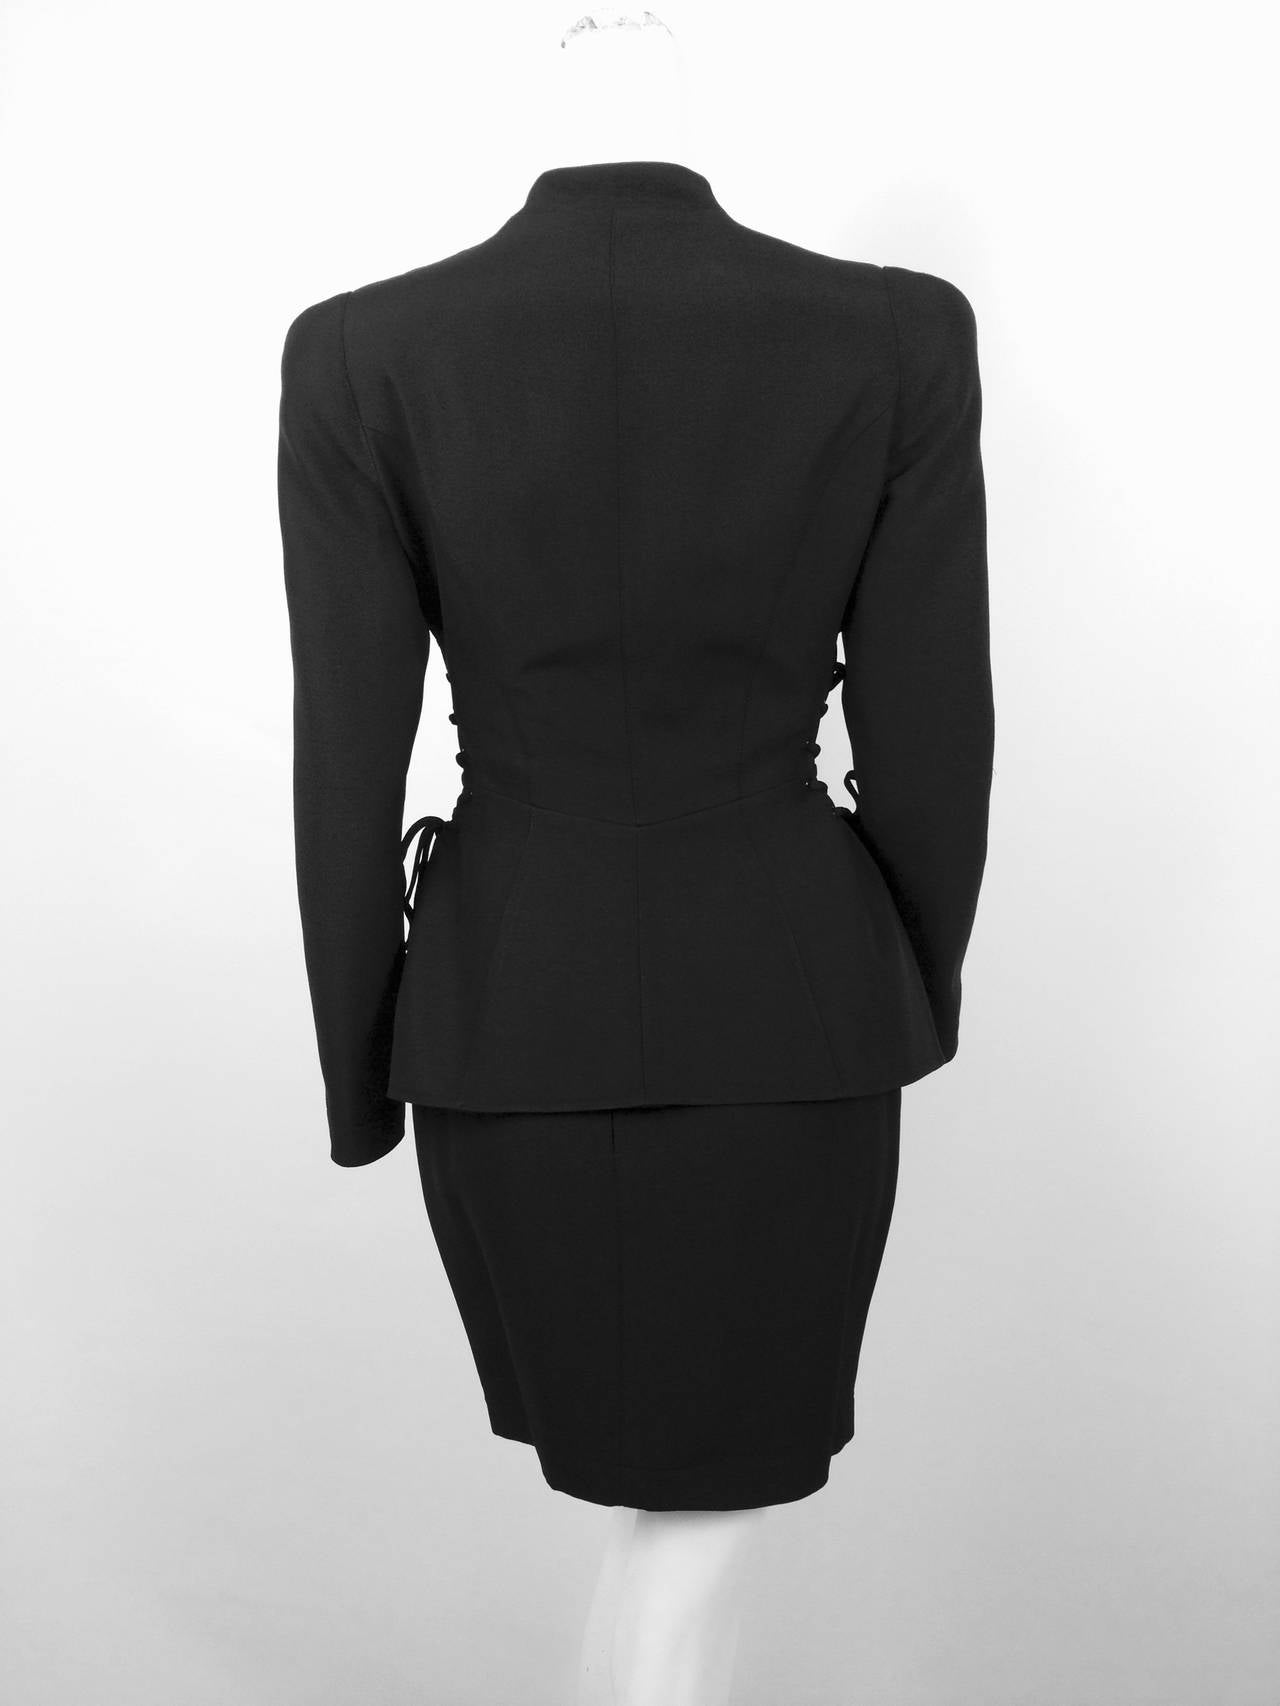 Relive the voluptuous silhouettes of the late 80's and early 90's in this vintage Thierry Mugler black skirt suit with corseted jacket!  The look says it all...